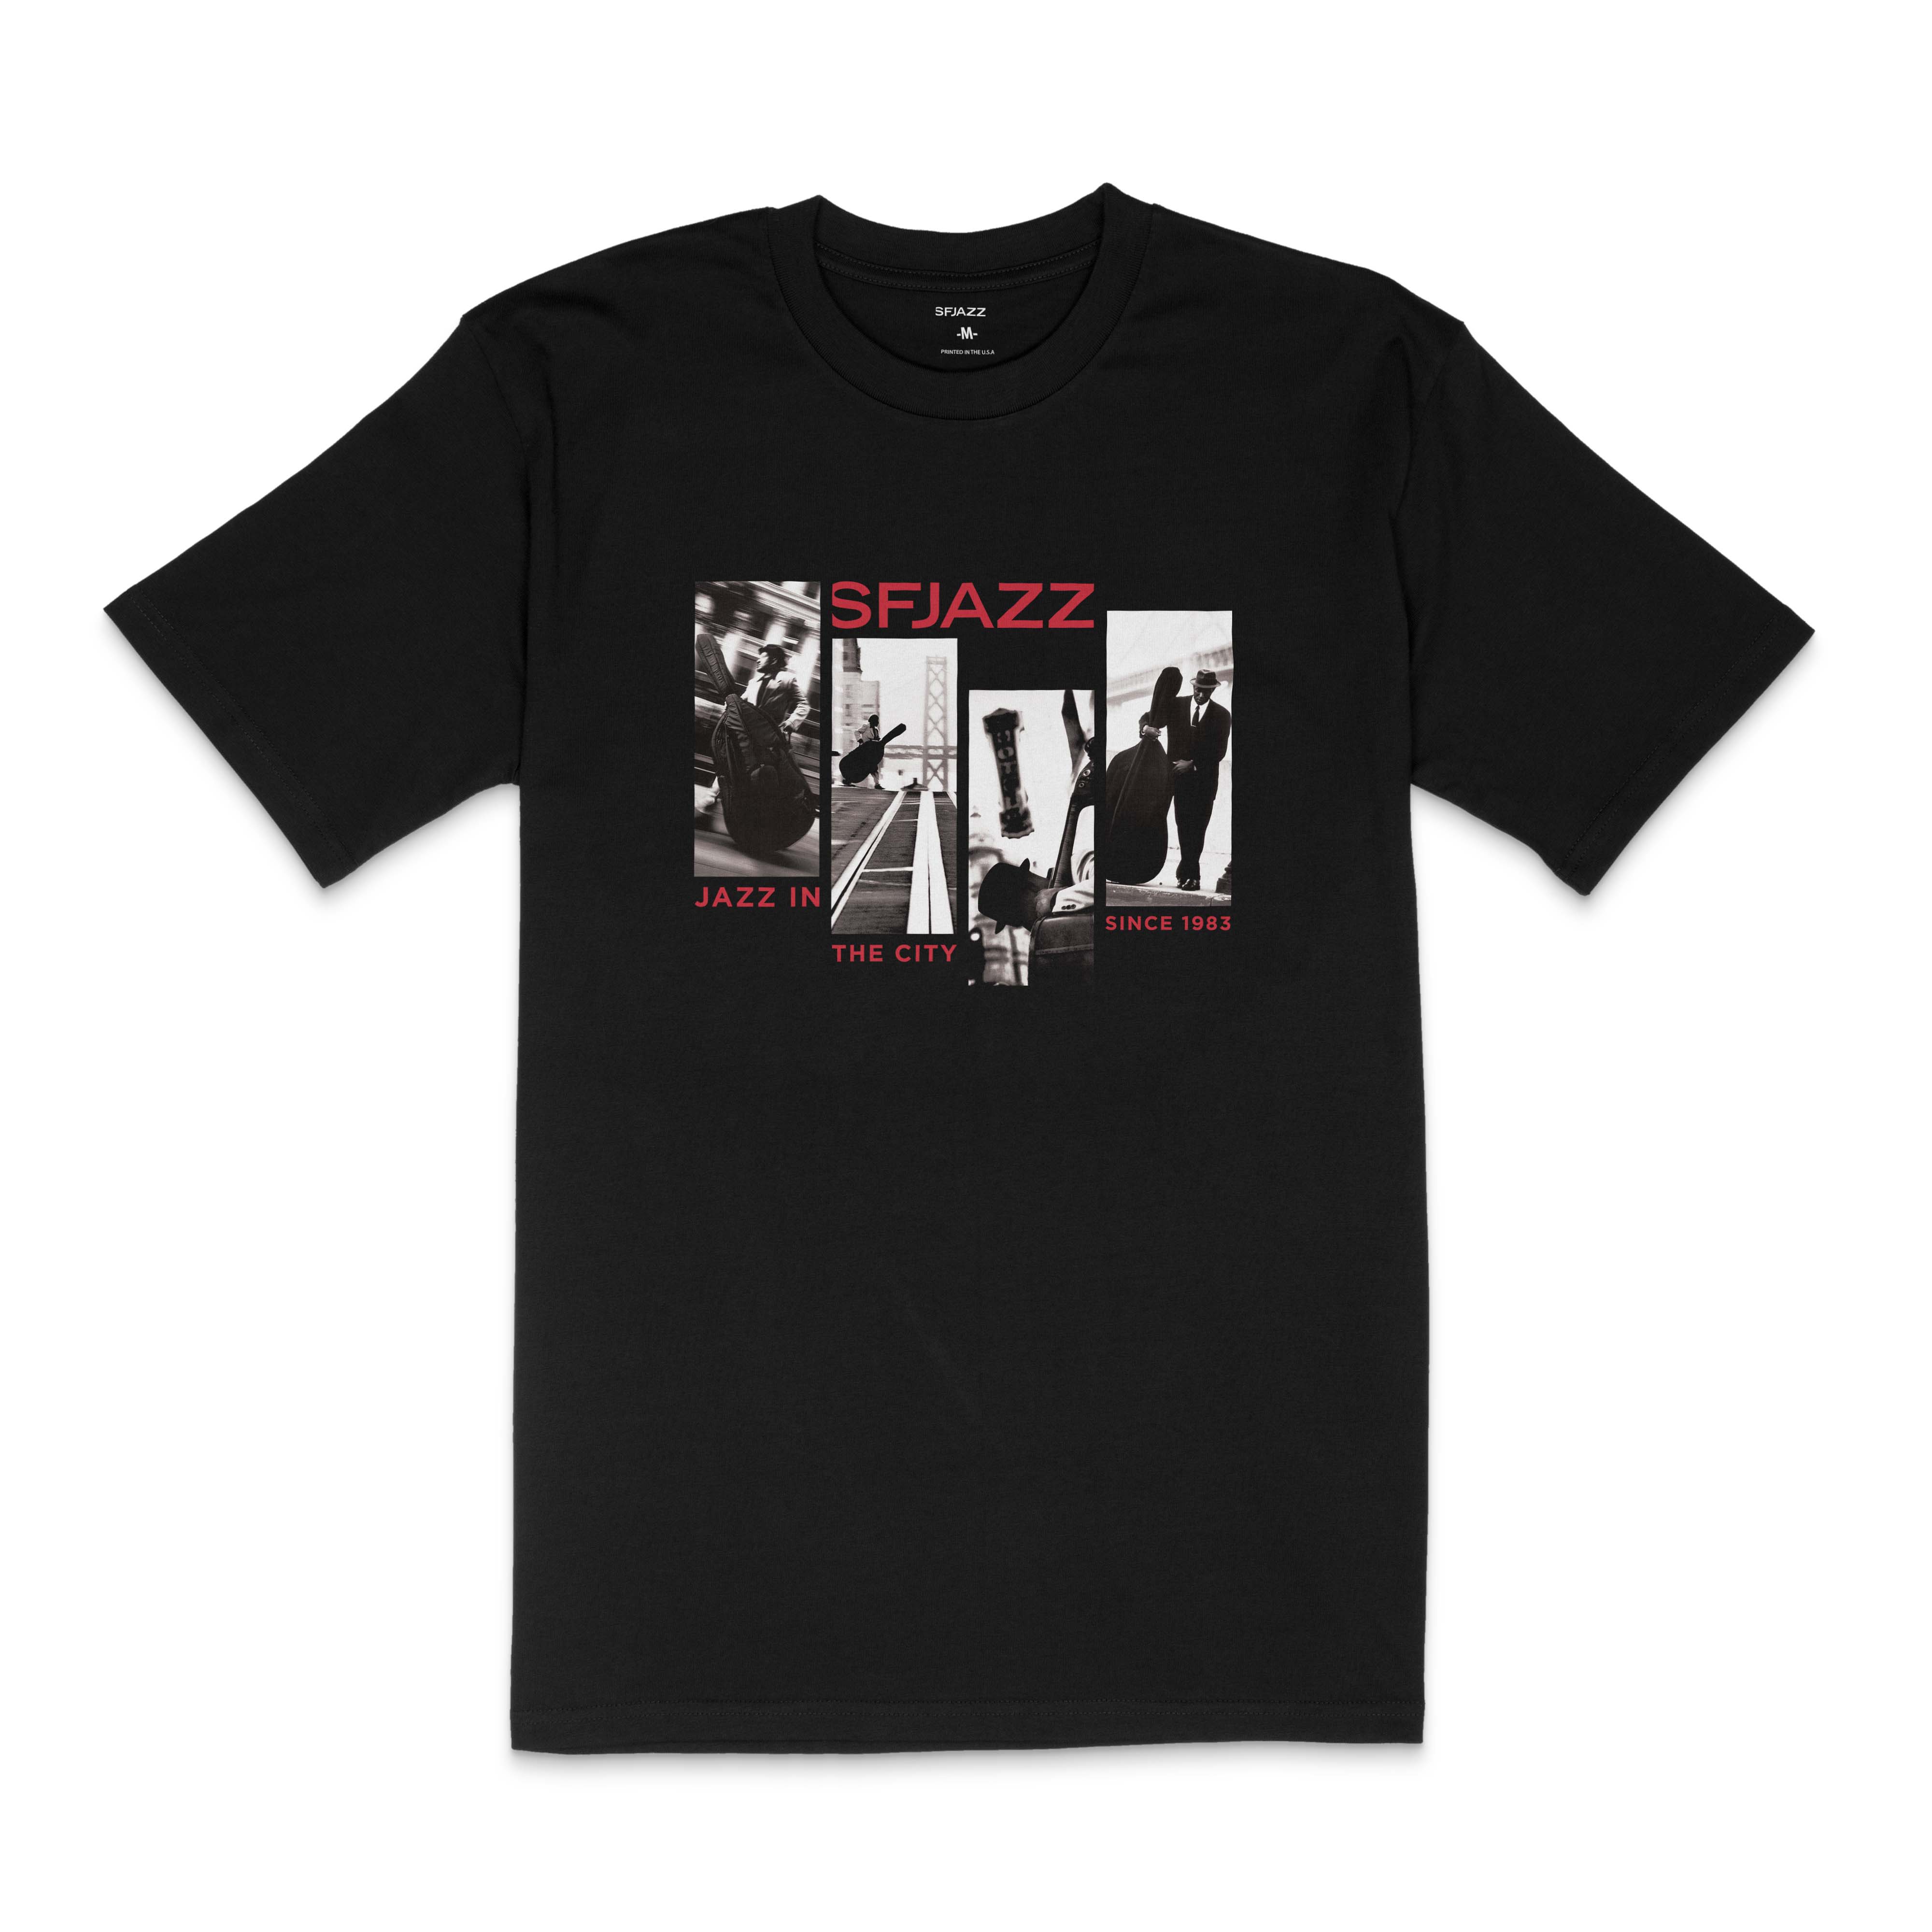 Jazz in the City T-Shirt